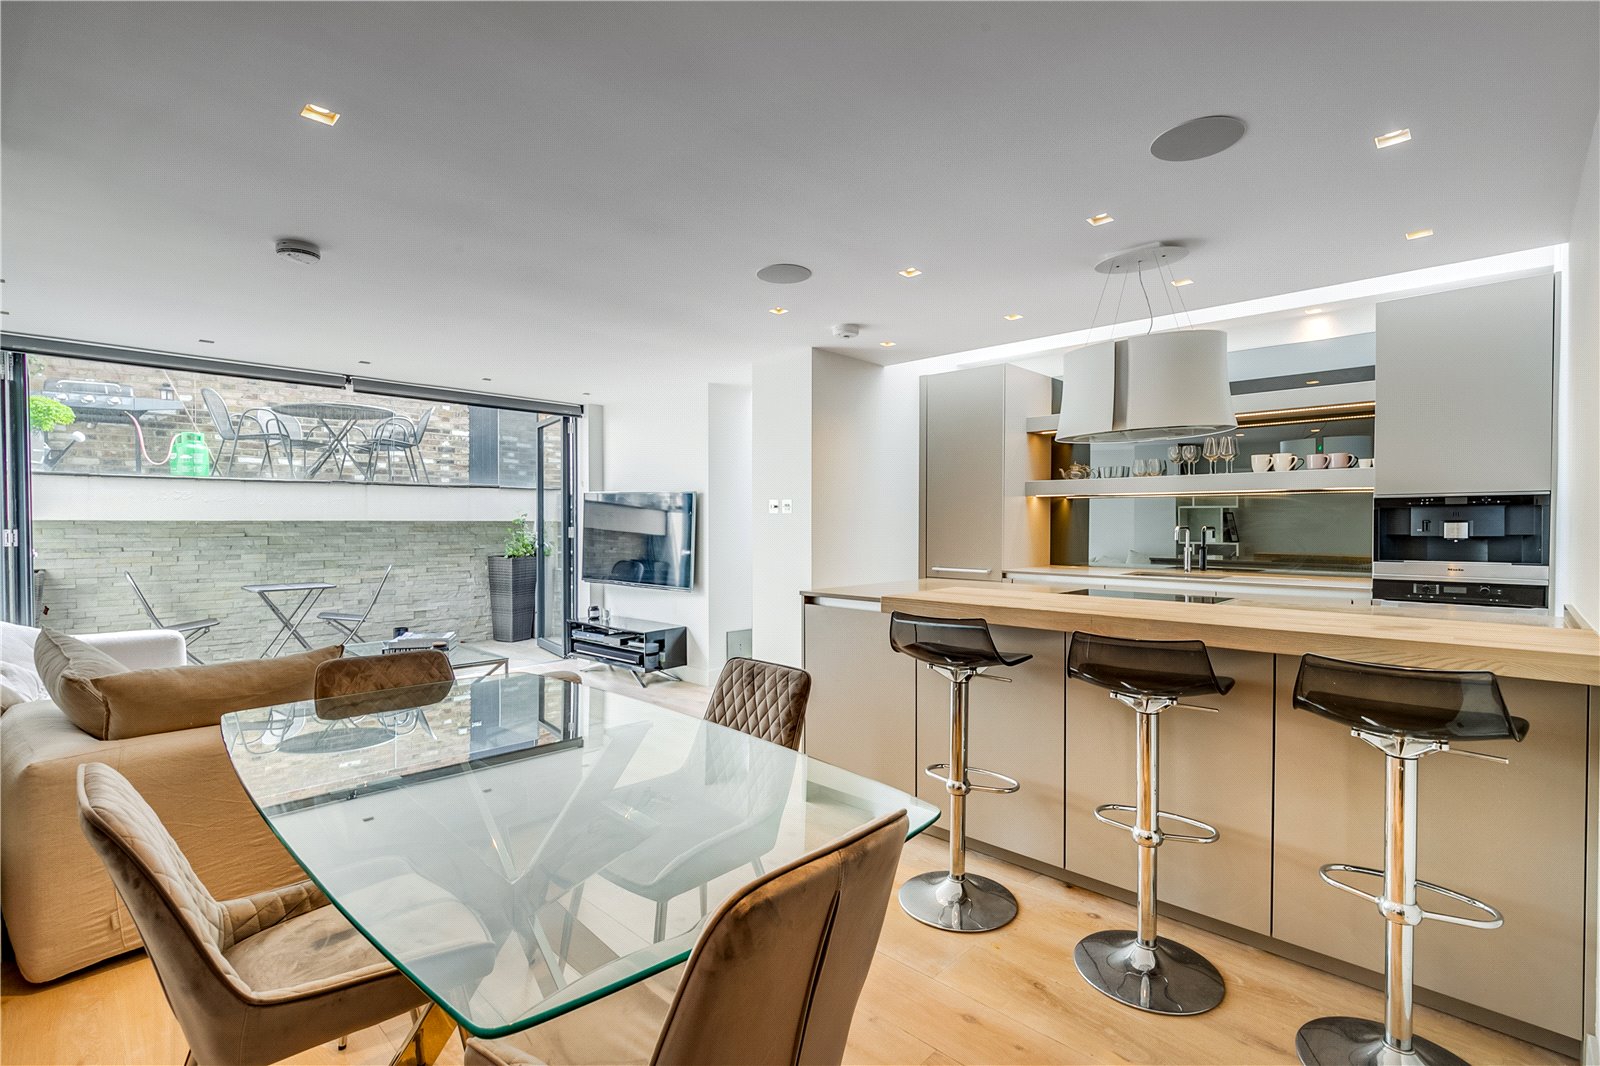 A superbly located Chelsea apartment